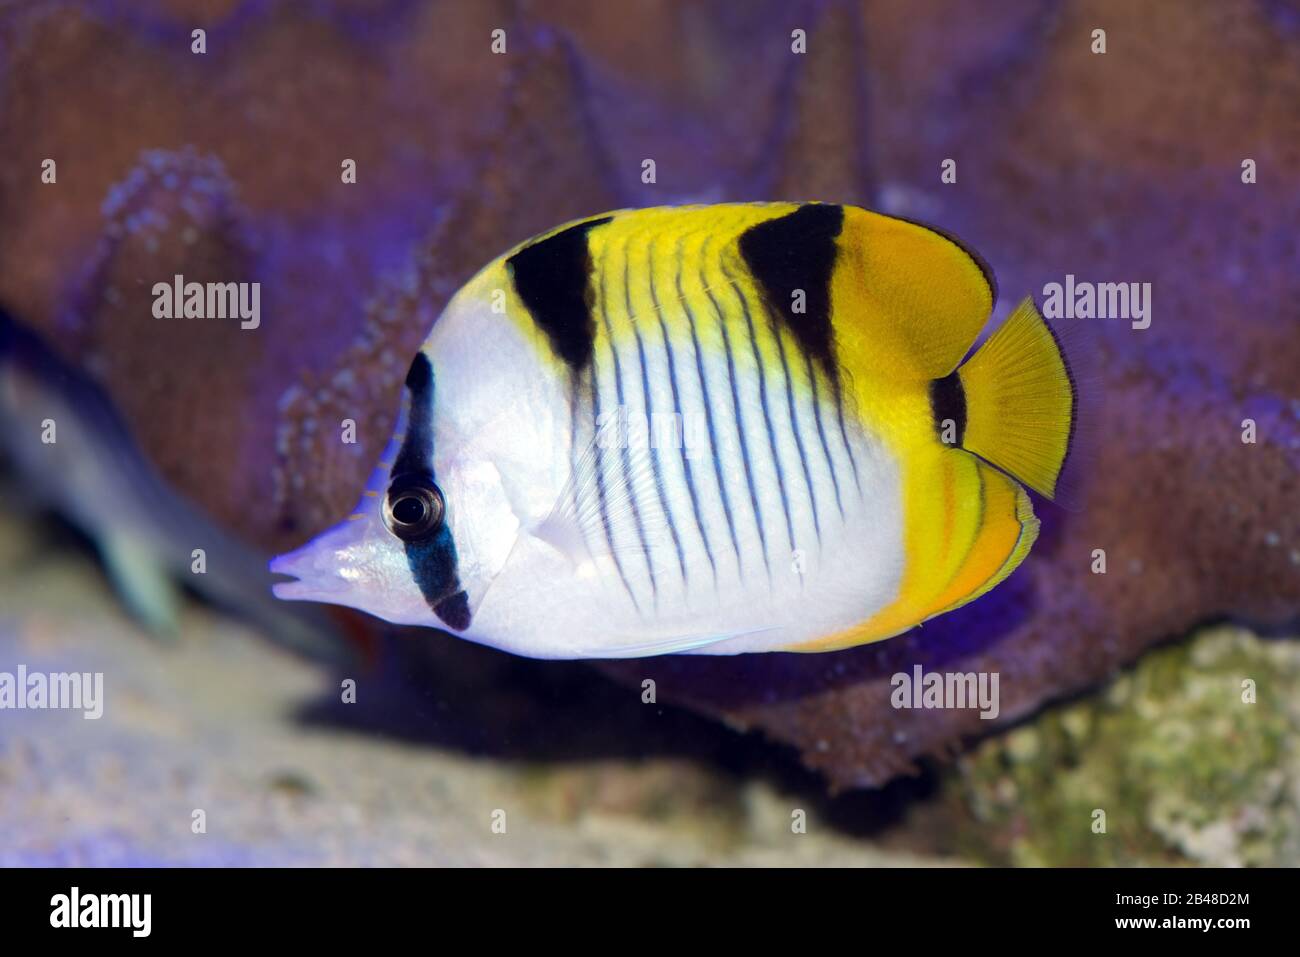 True Falcula Butterflyfish, Chaetodon falcula, also known as black-wedged, or saddle back butterflyfish, from the Indian Ocean Stock Photo